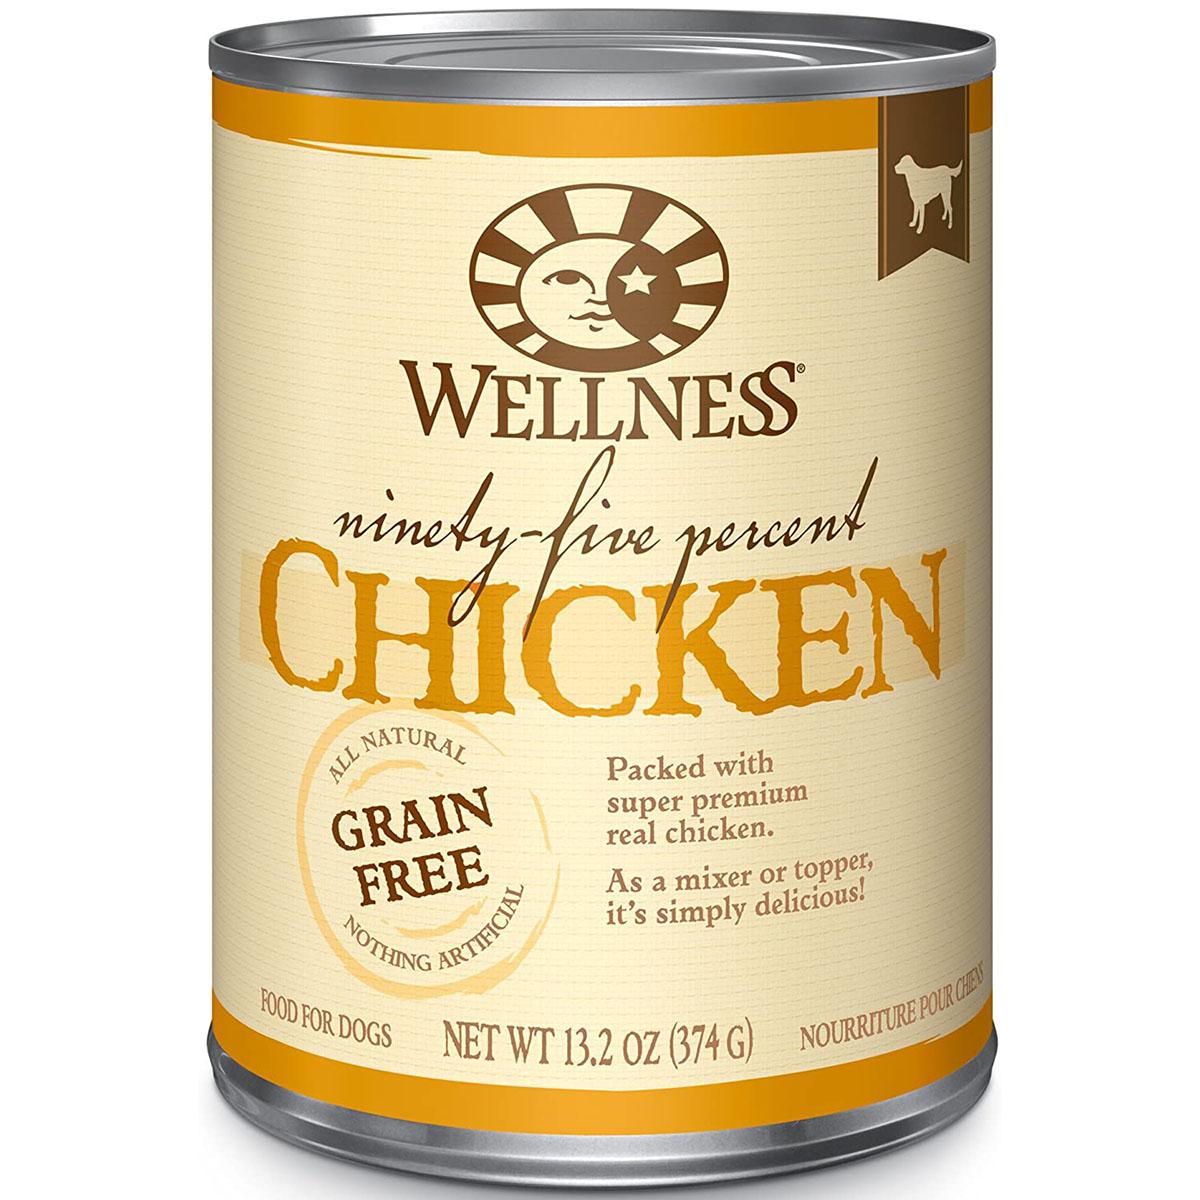 Wellness Ninety-Five Percent Chicken Grain-Free Dog Food Mixer and Topper